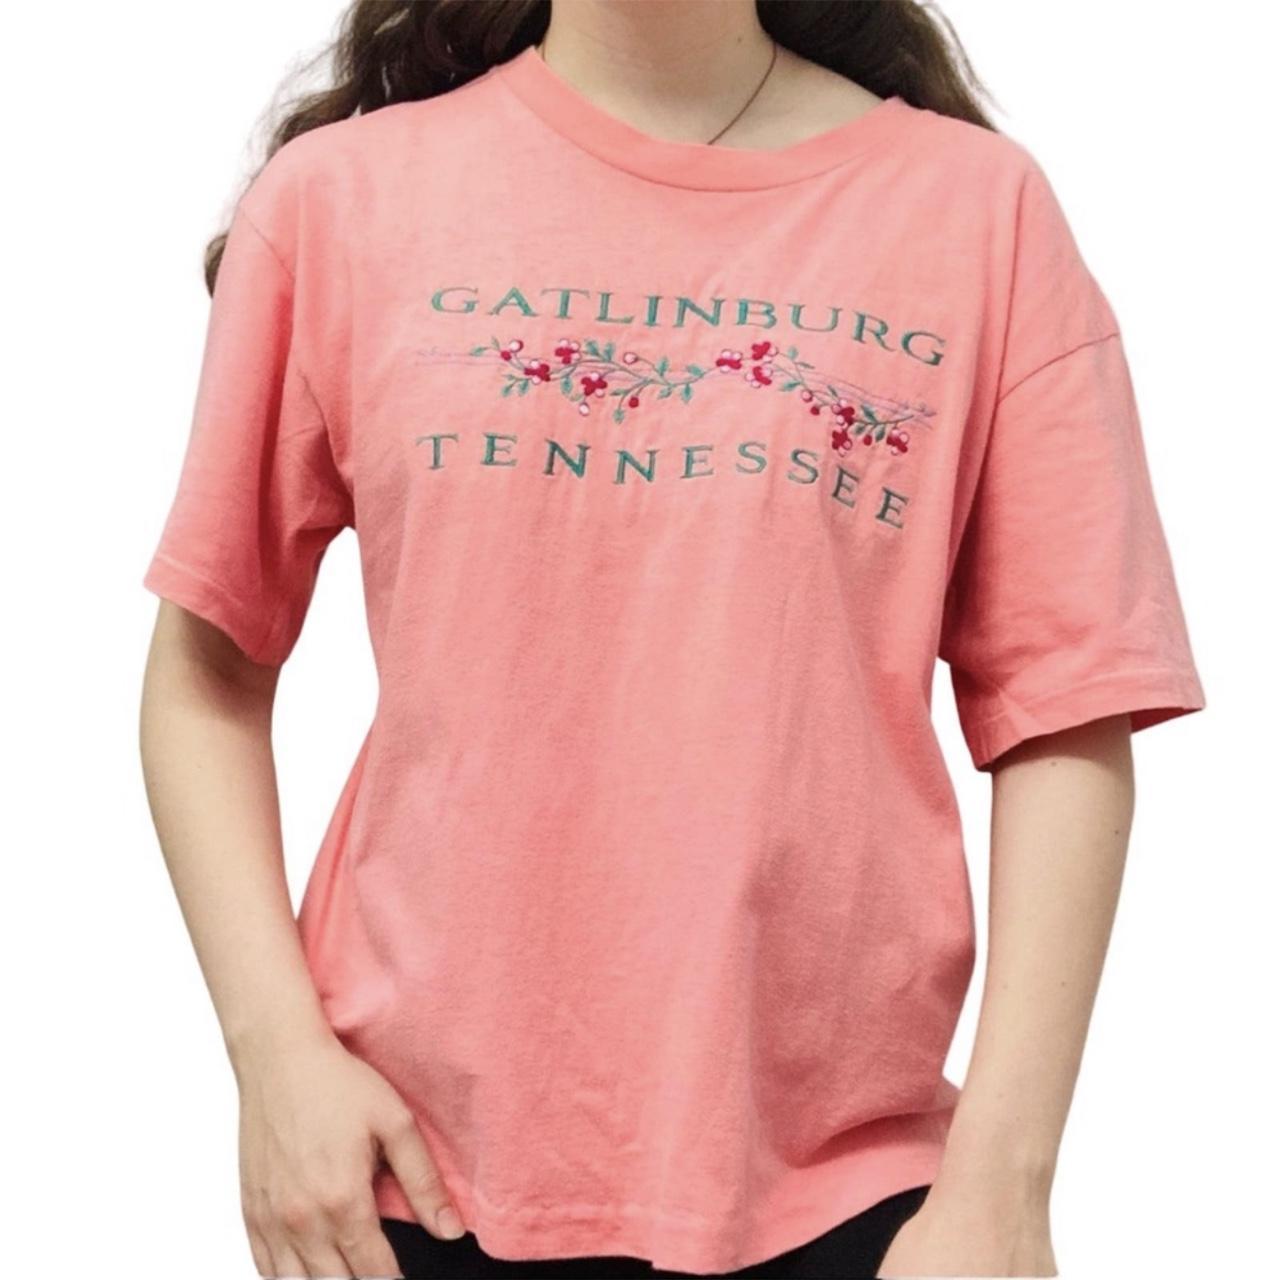 GET IN THE HOLE T-SHIRT - WOMENS PINK